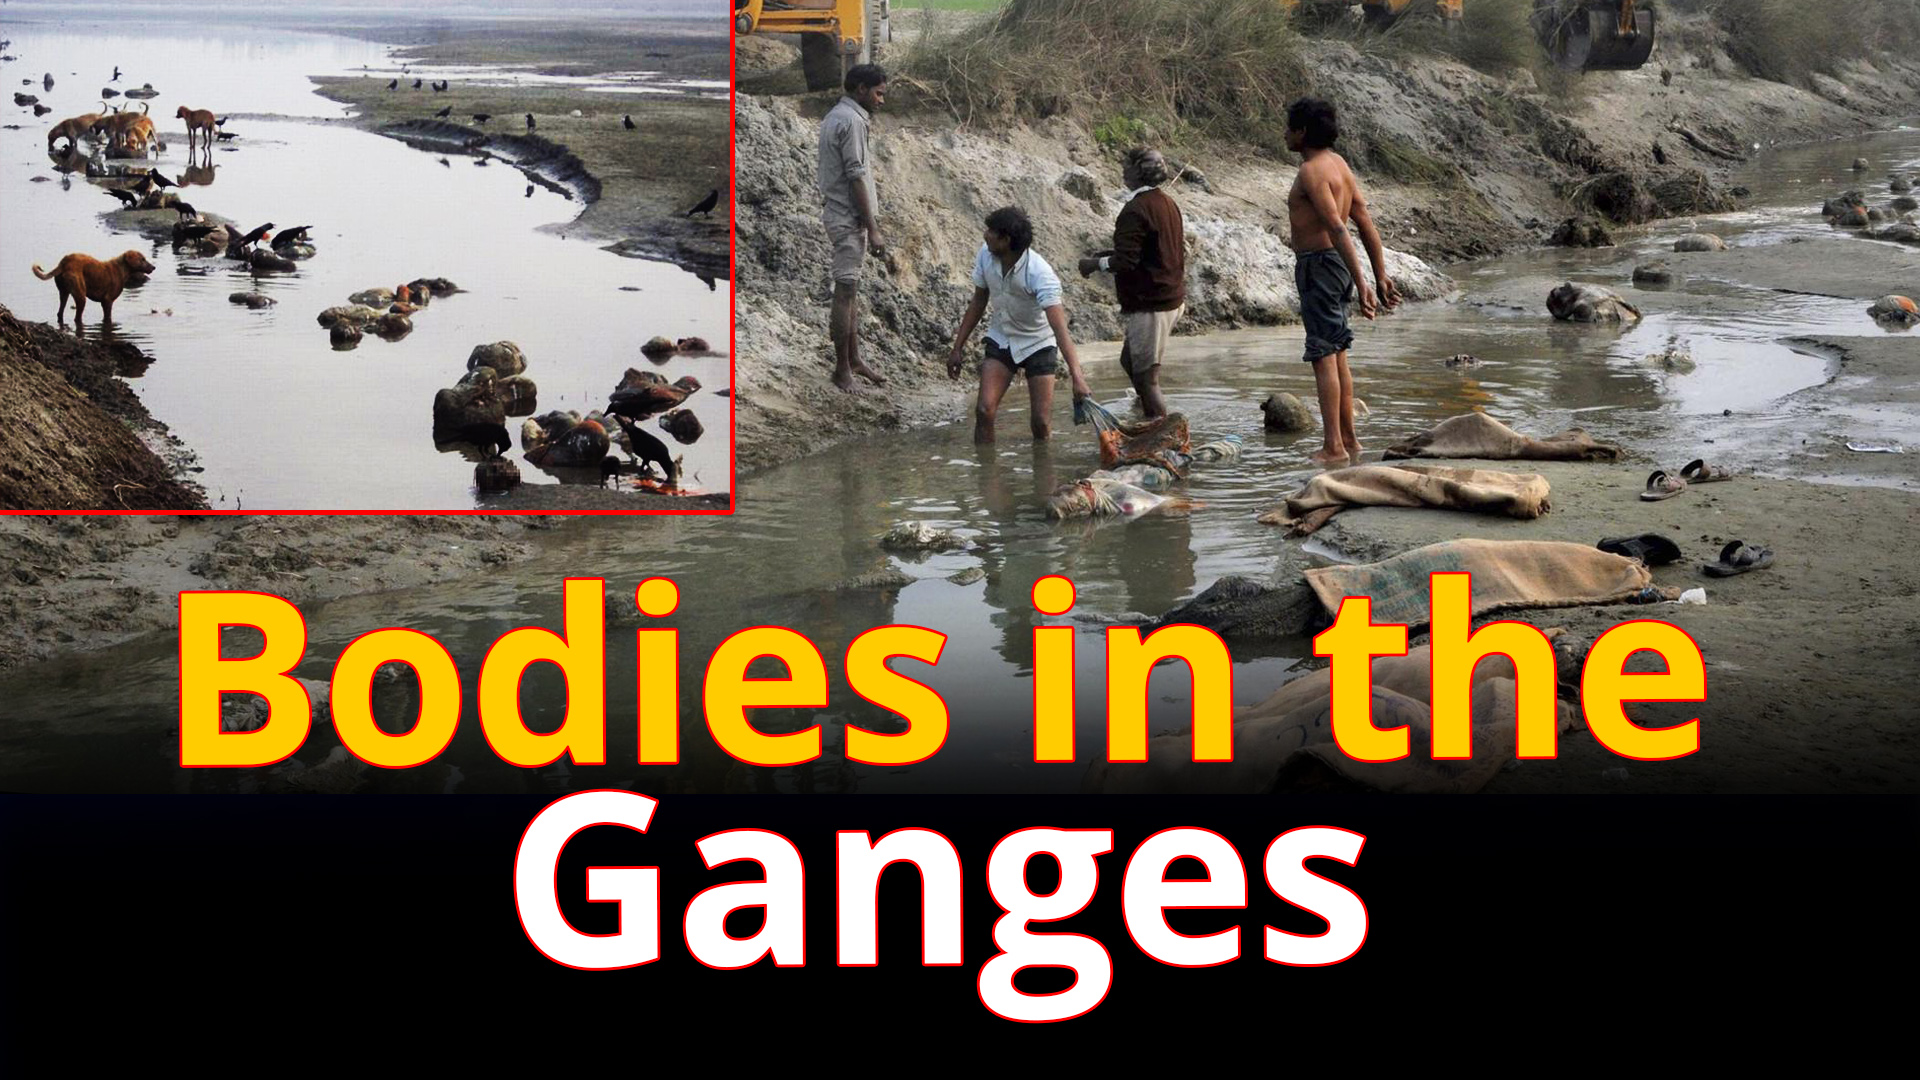 Decomposing bodies float in Ganga, spread panic about infection